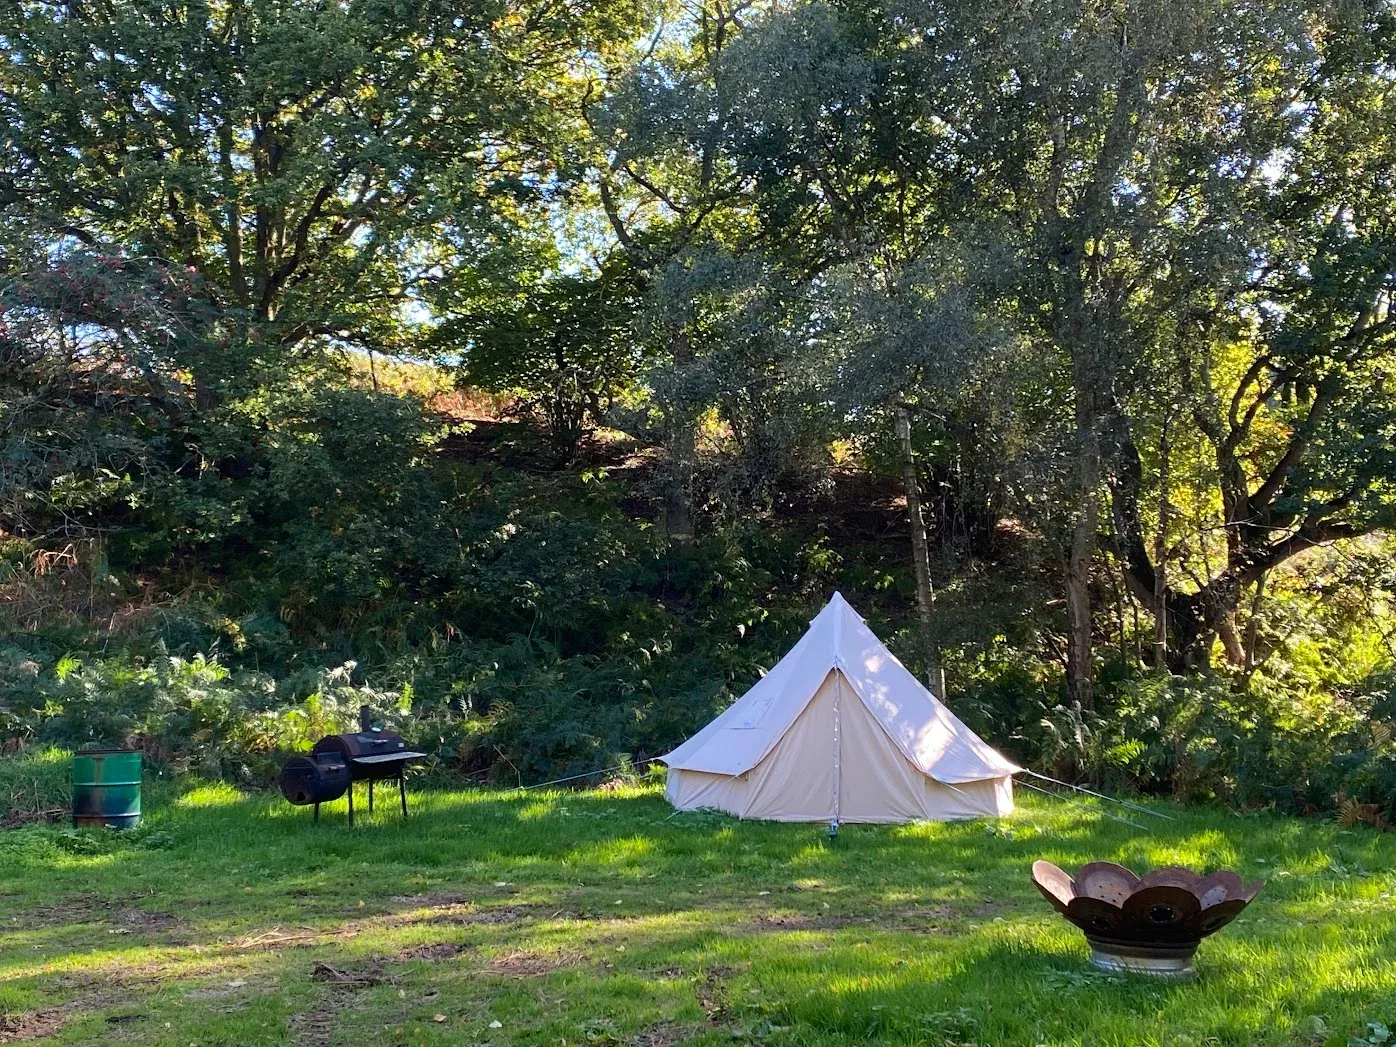 A bell tent with an outdoor bbq, firepit and plenty of green space